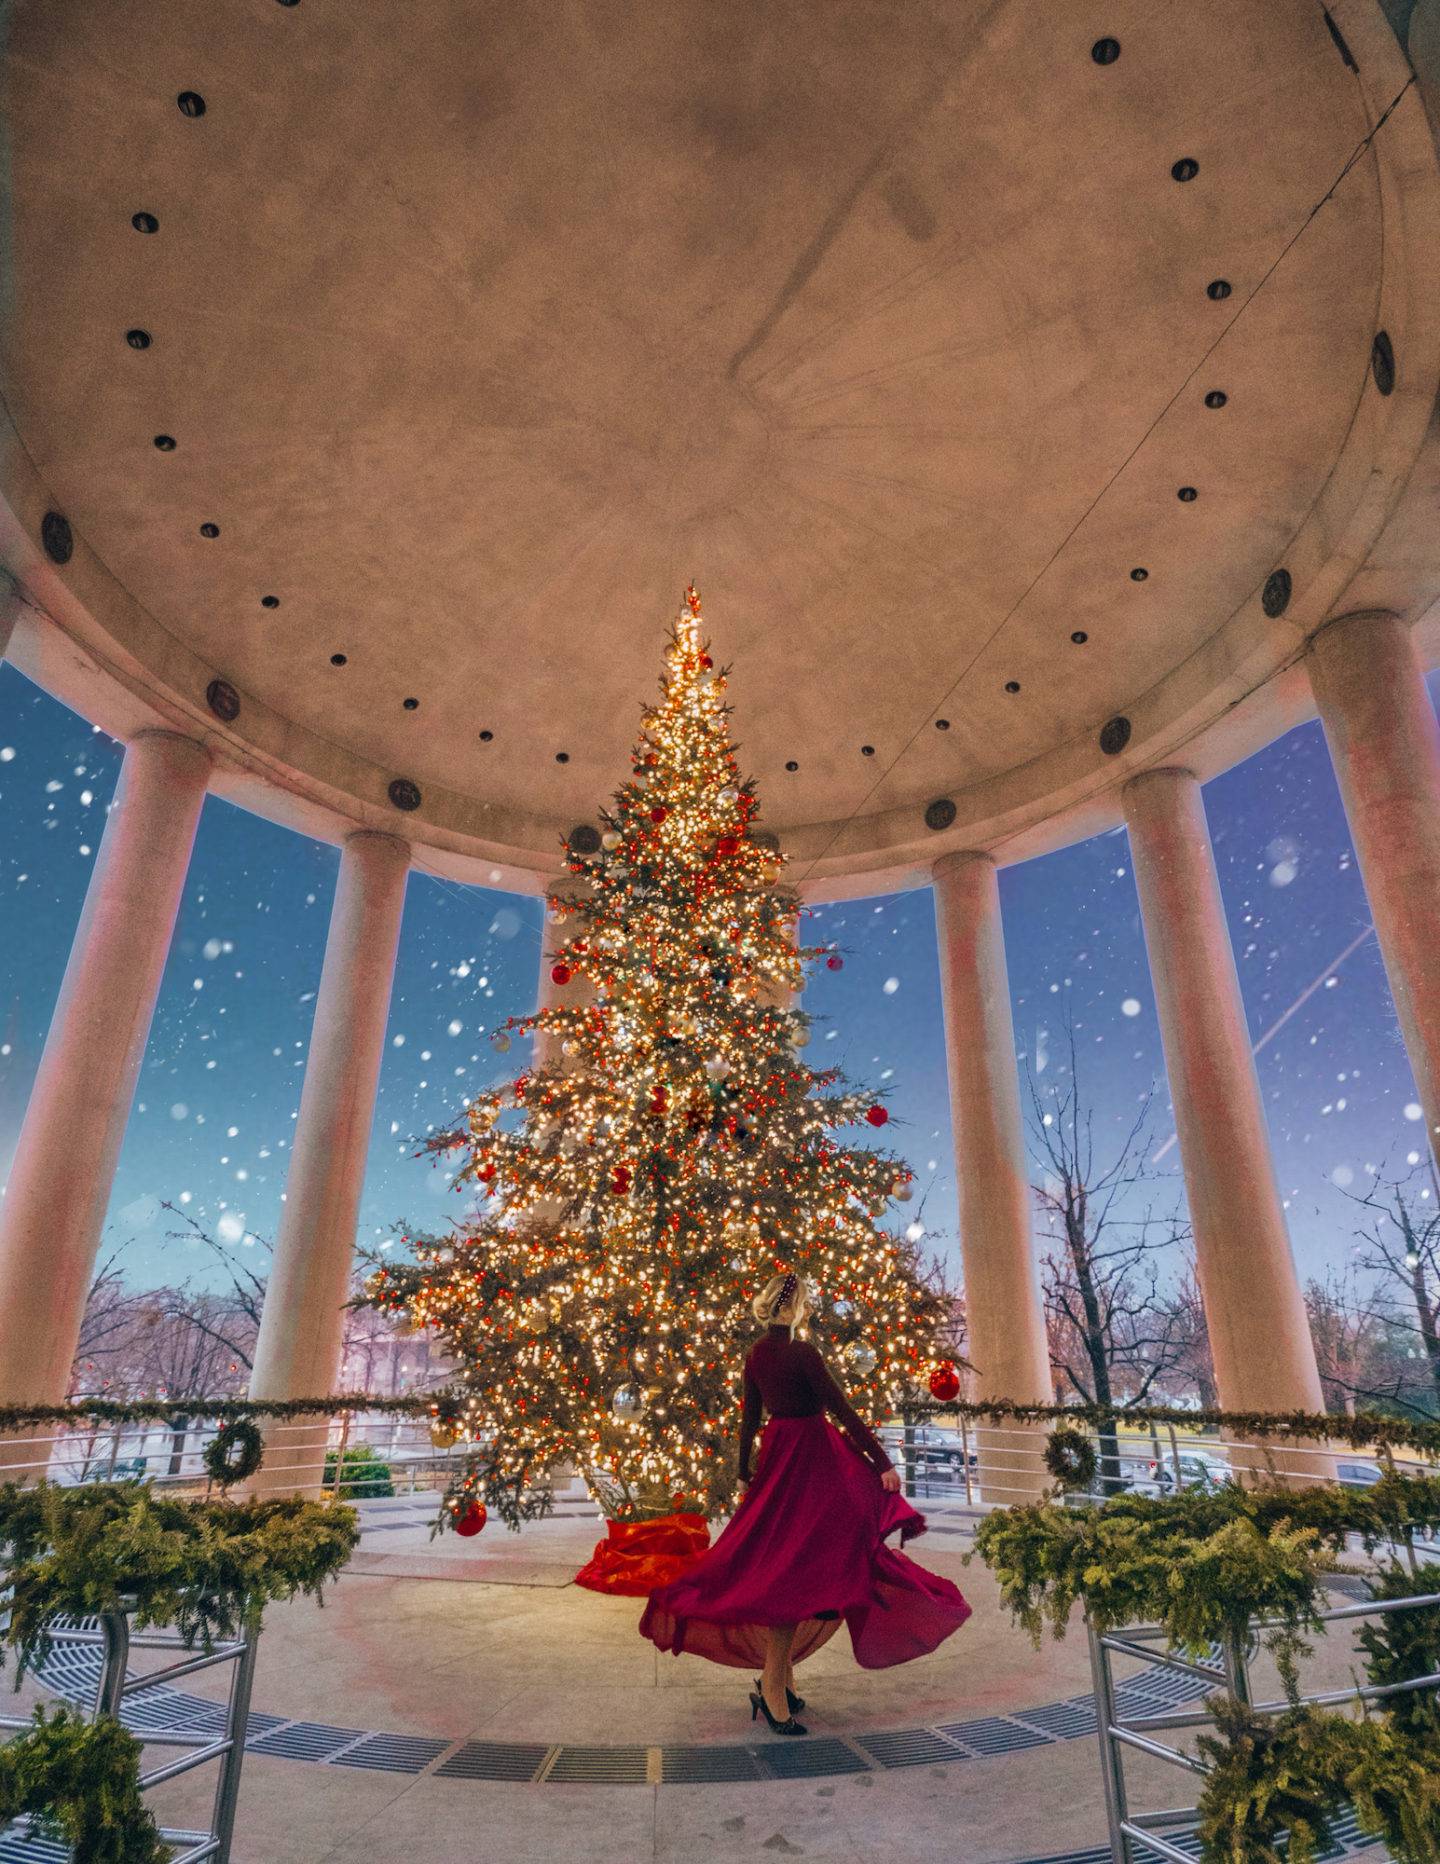 Things to do in Washington at Christmas Time: Check out the Canadian Embassy's Christmas tree. It's a must see at night!